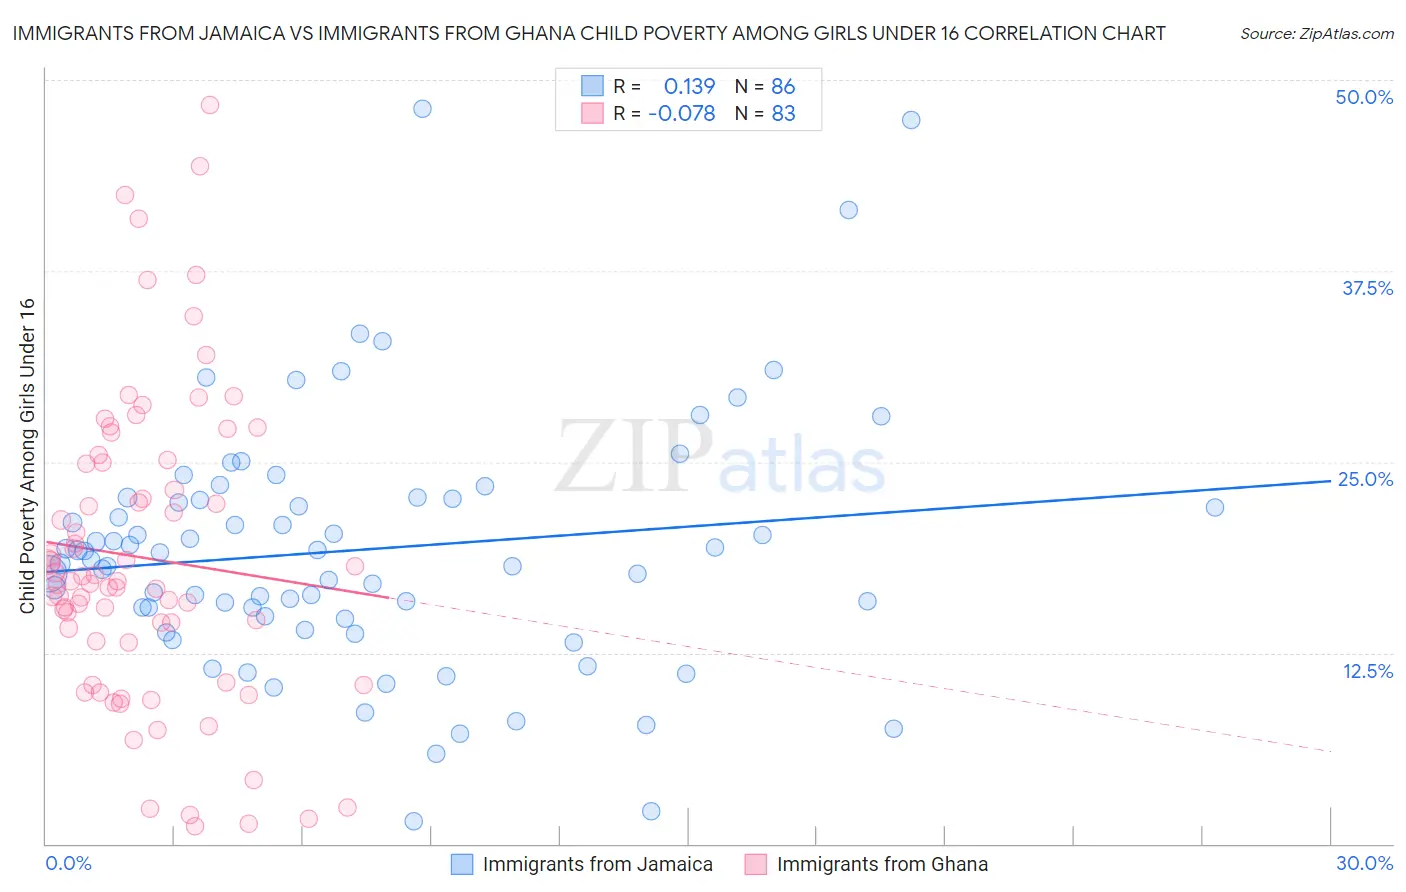 Immigrants from Jamaica vs Immigrants from Ghana Child Poverty Among Girls Under 16